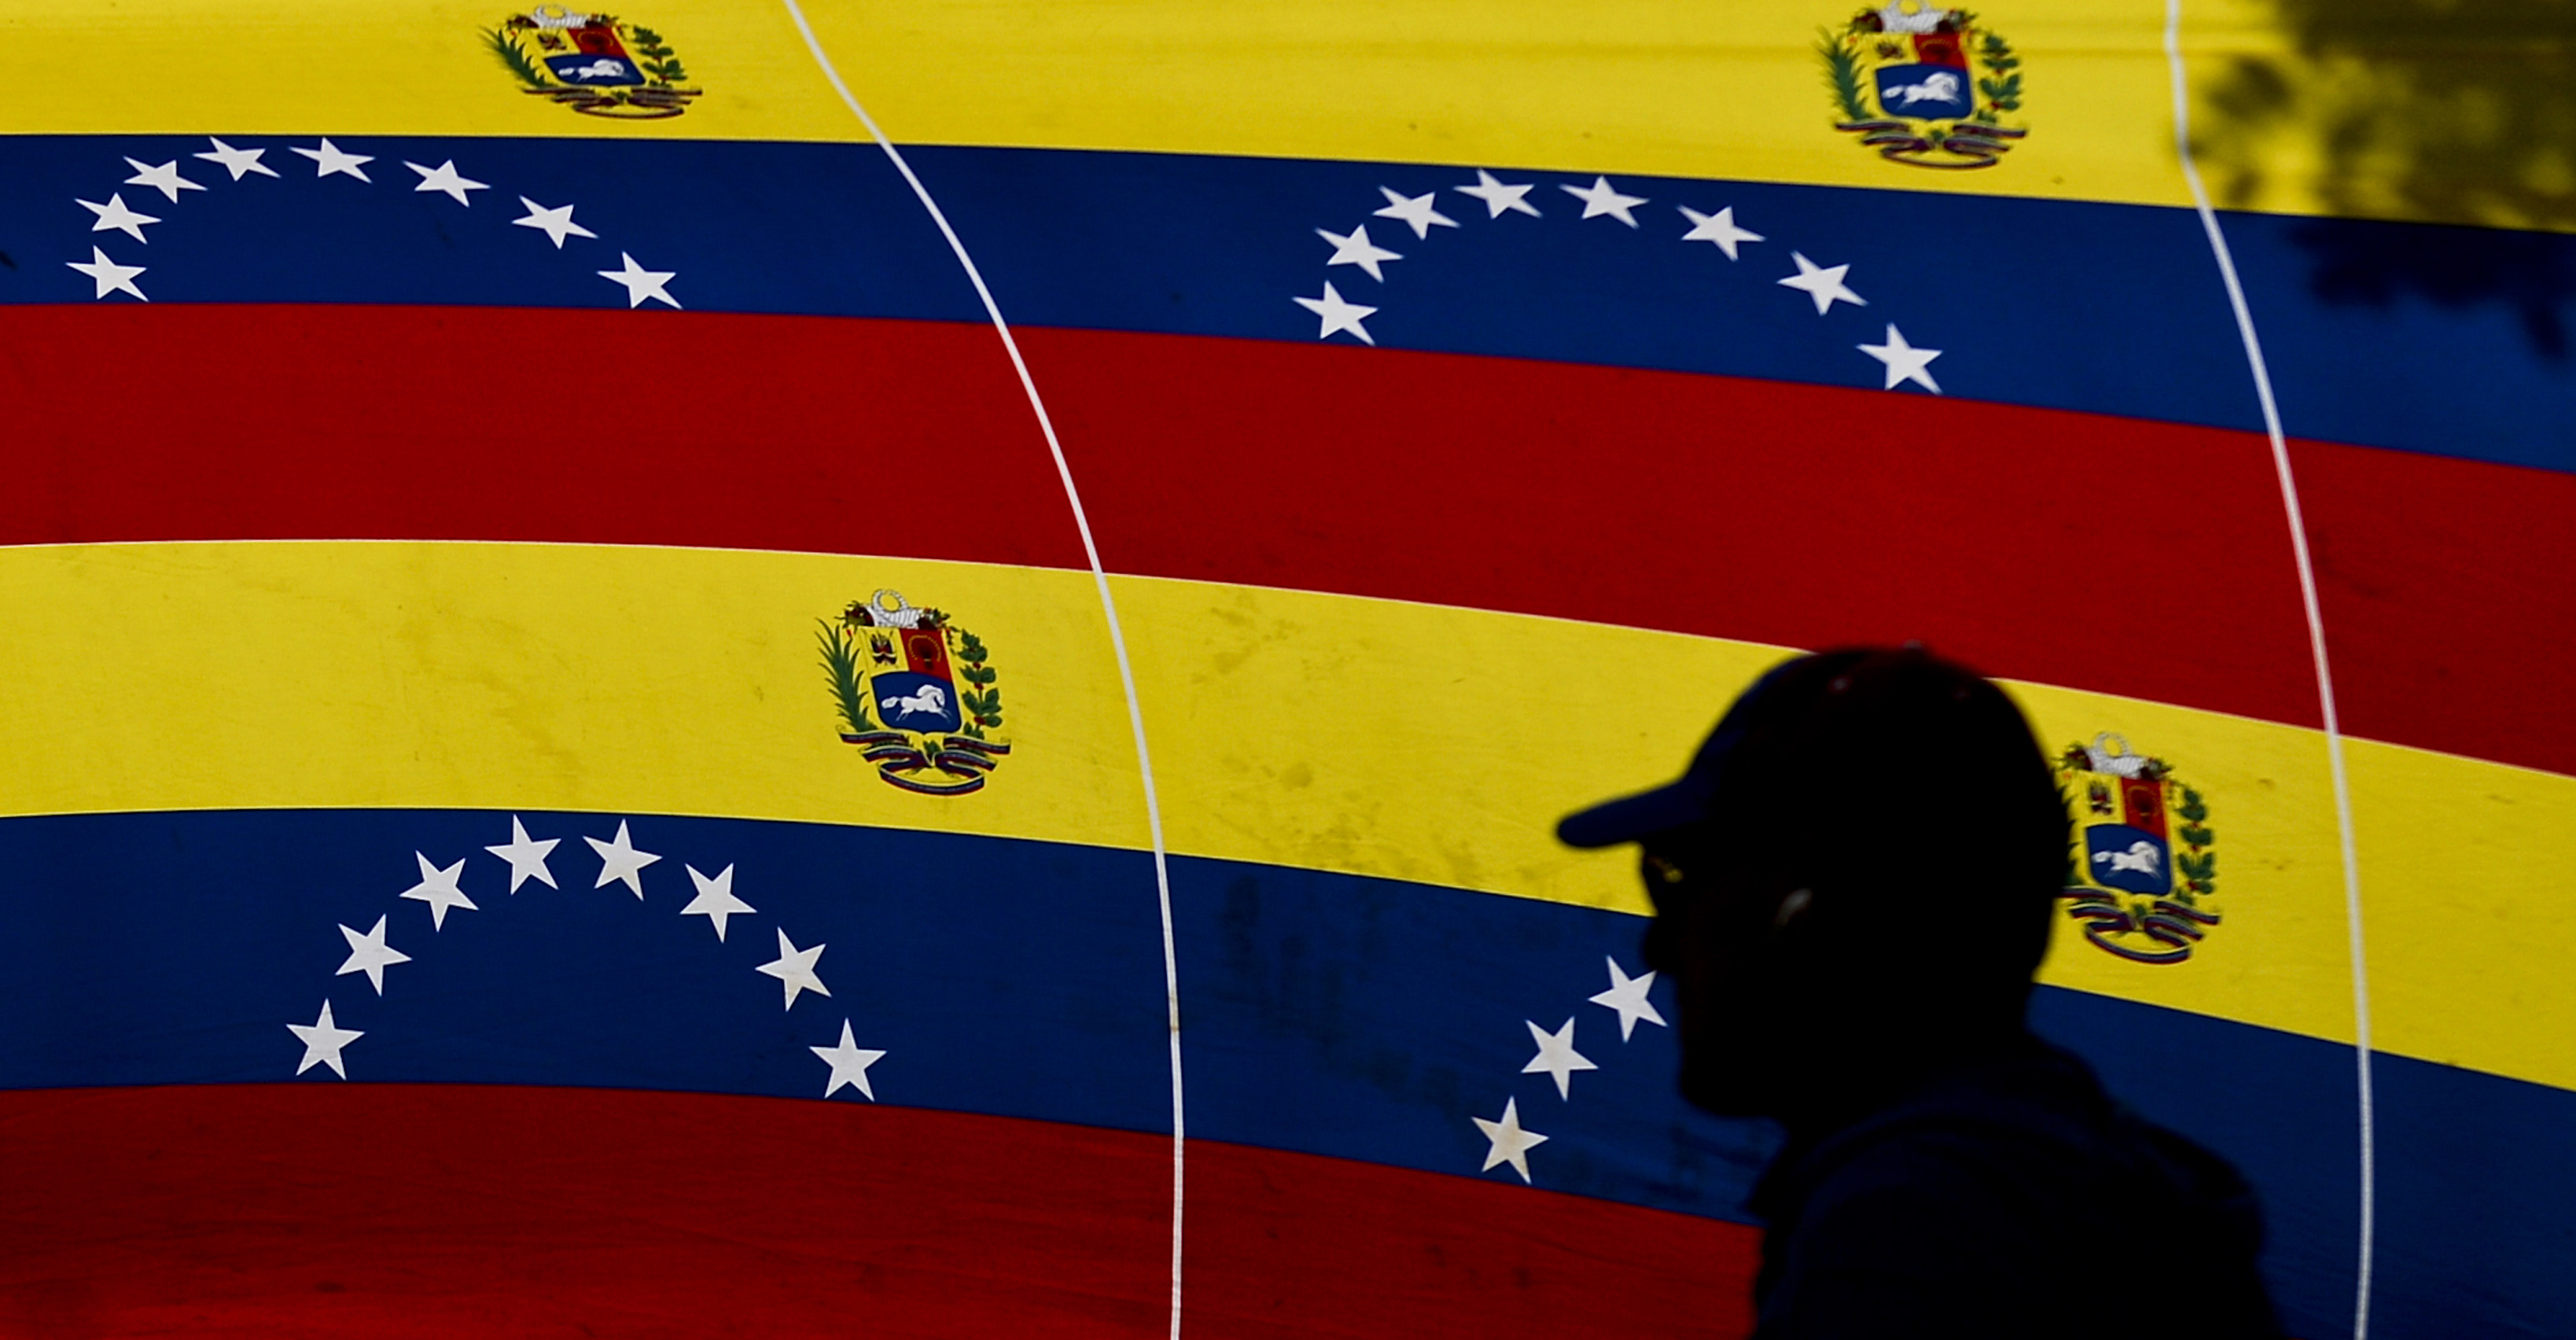 A man passes by national flags at a polling station during Venezuela's legislative election in Caracas on Dec. 6, 2015. (Luis Robayo—AFP/Getty Images)